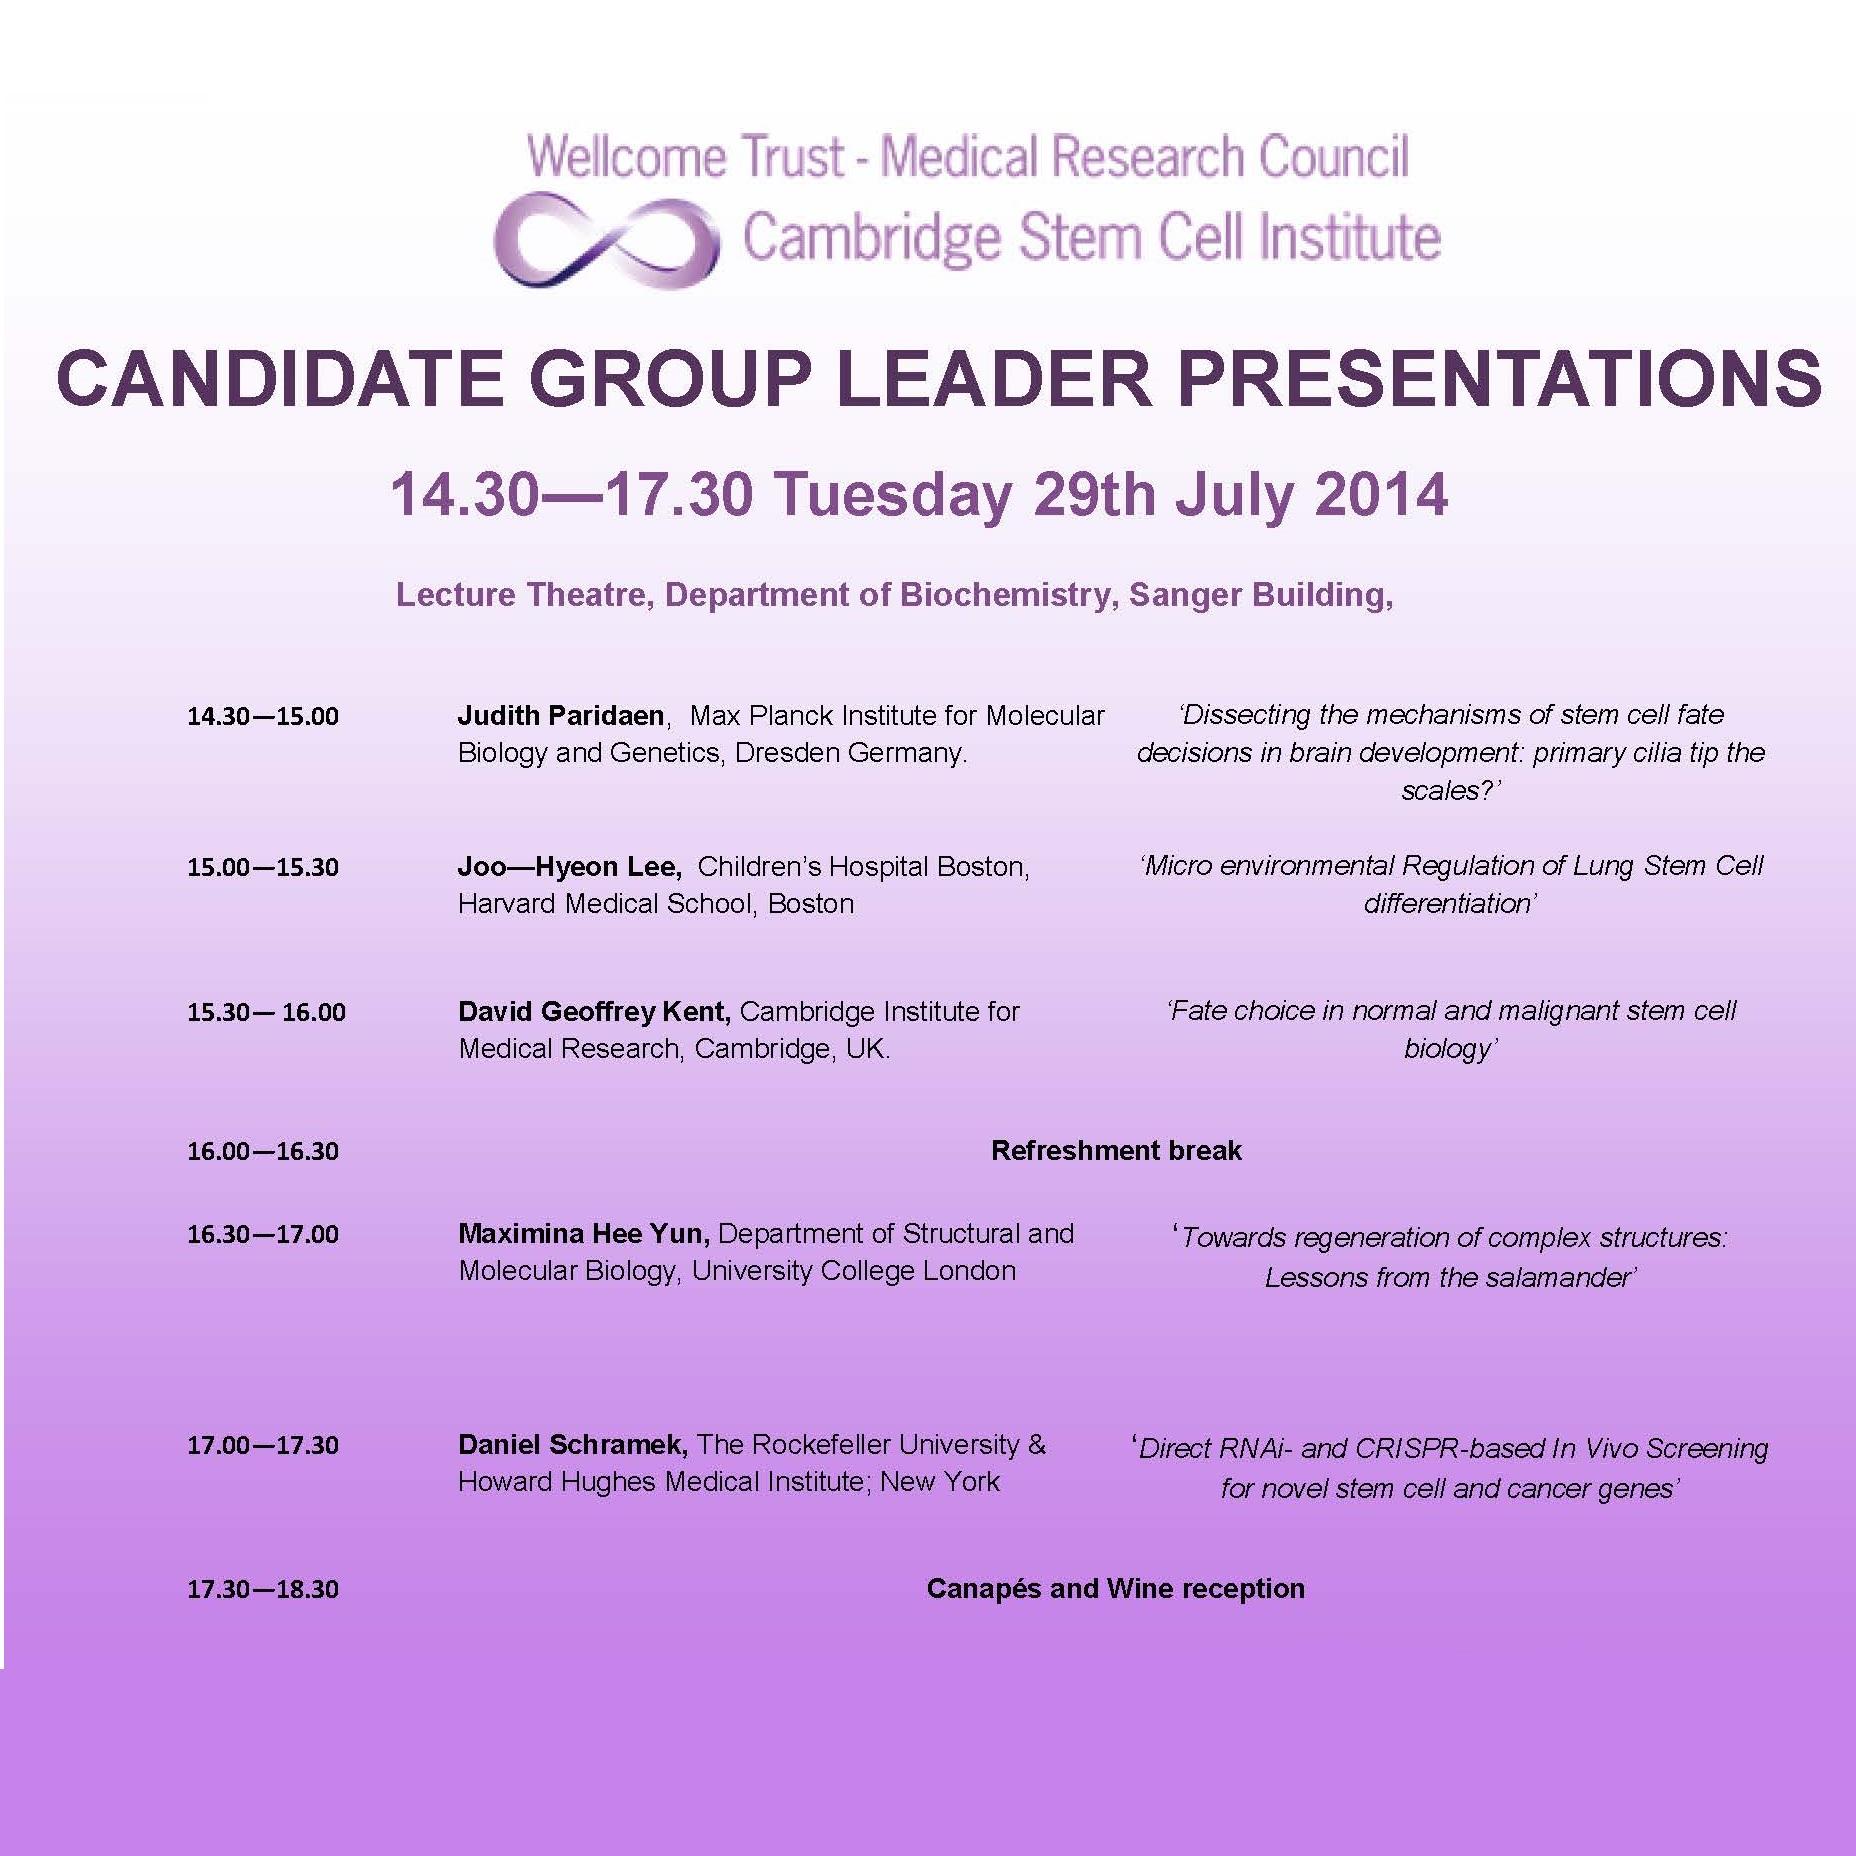 Candidate Group Leader Presentations